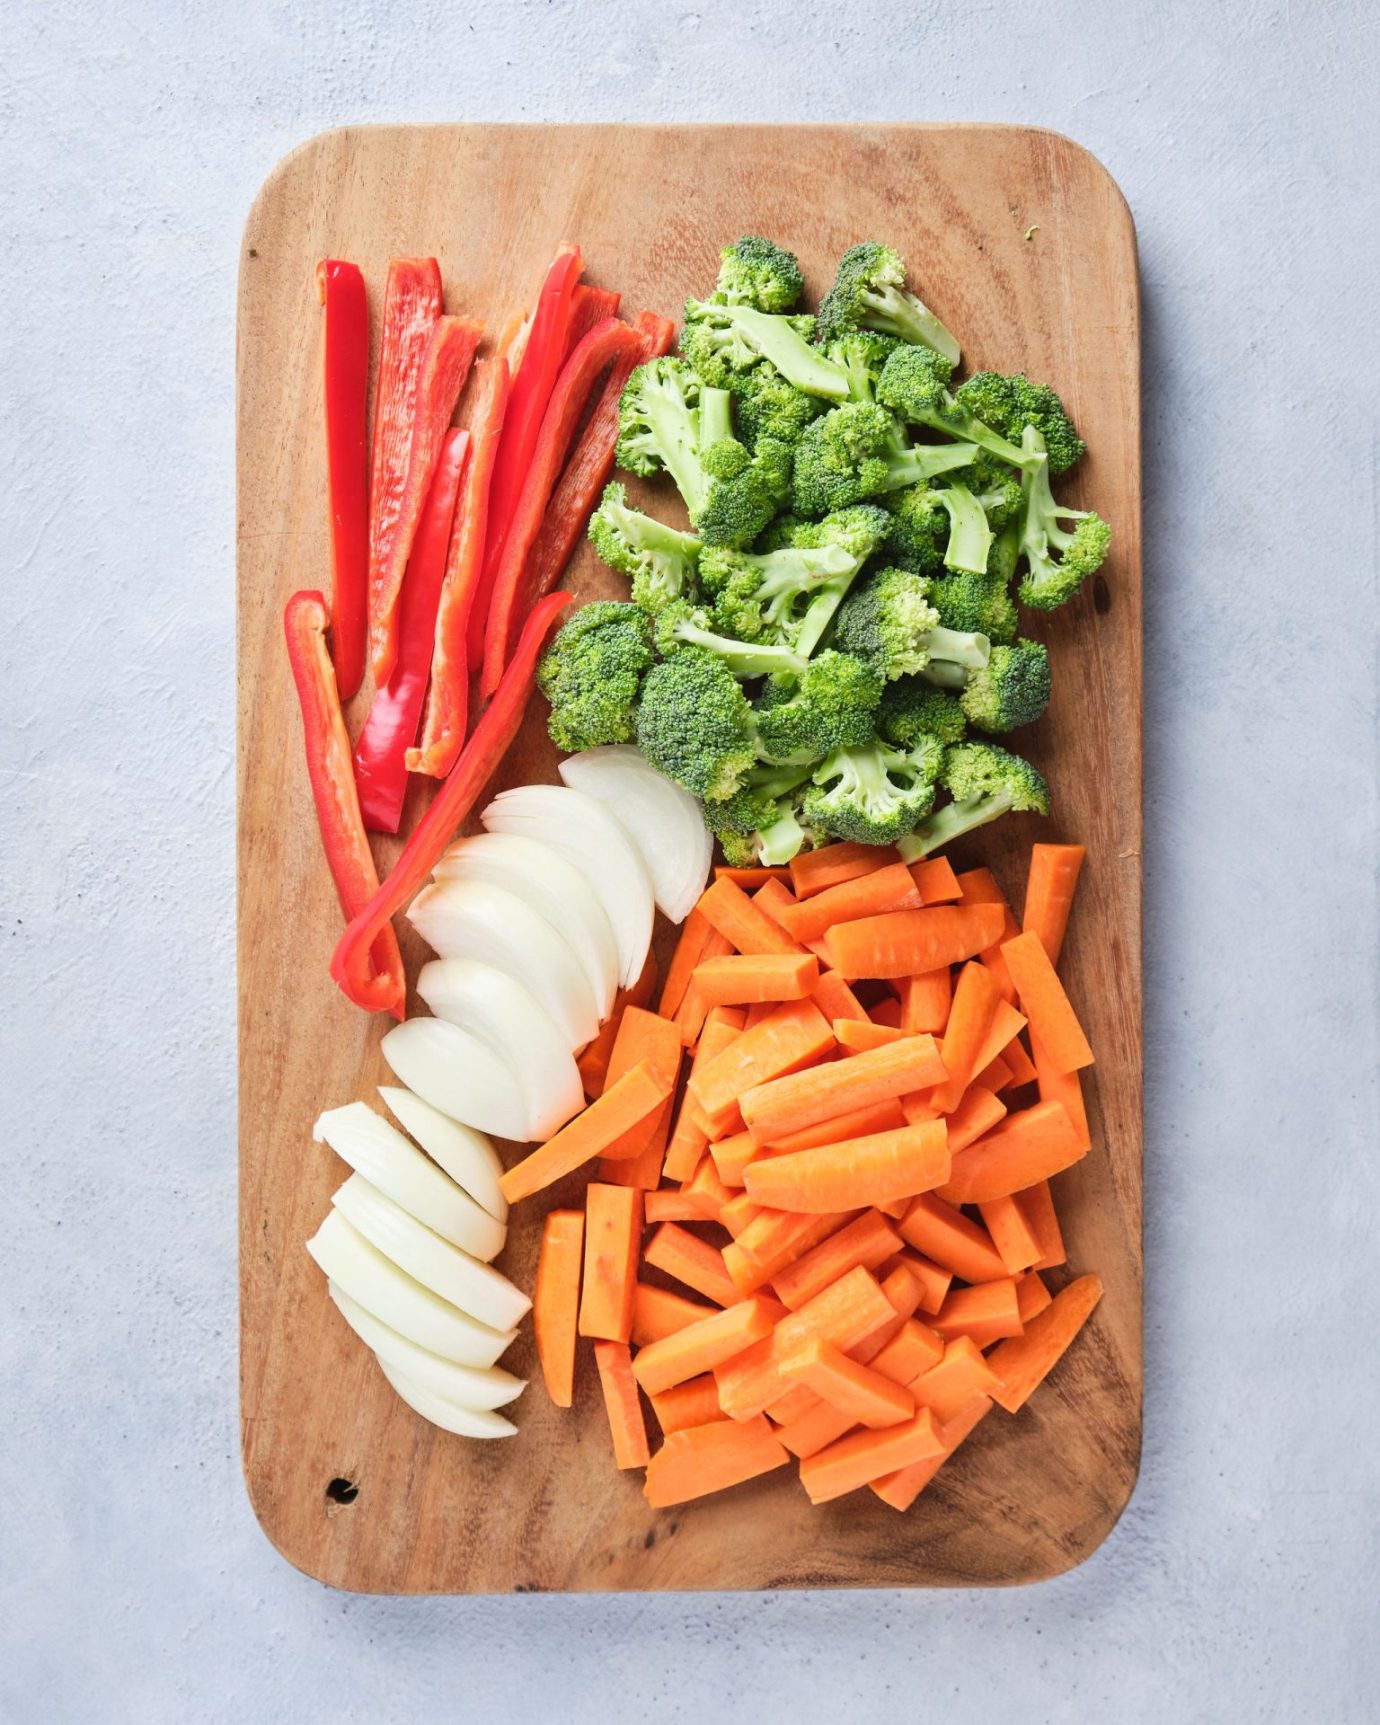 Chopped vegetables on a wooden chopping board